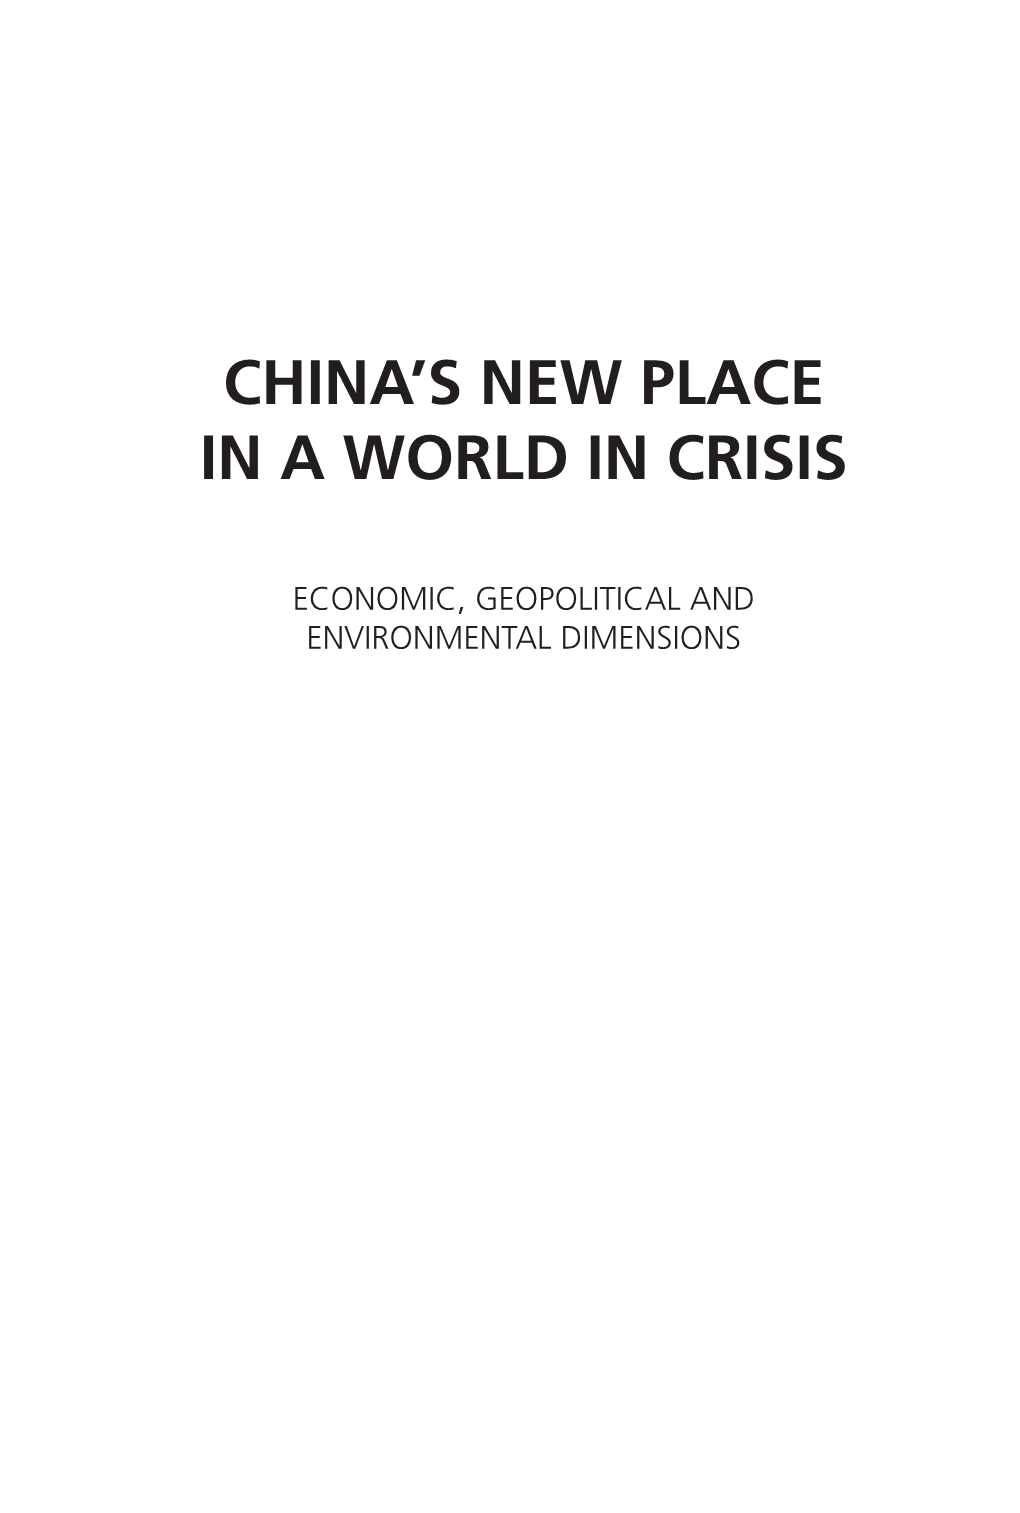 China's New Place in a World in Crisis